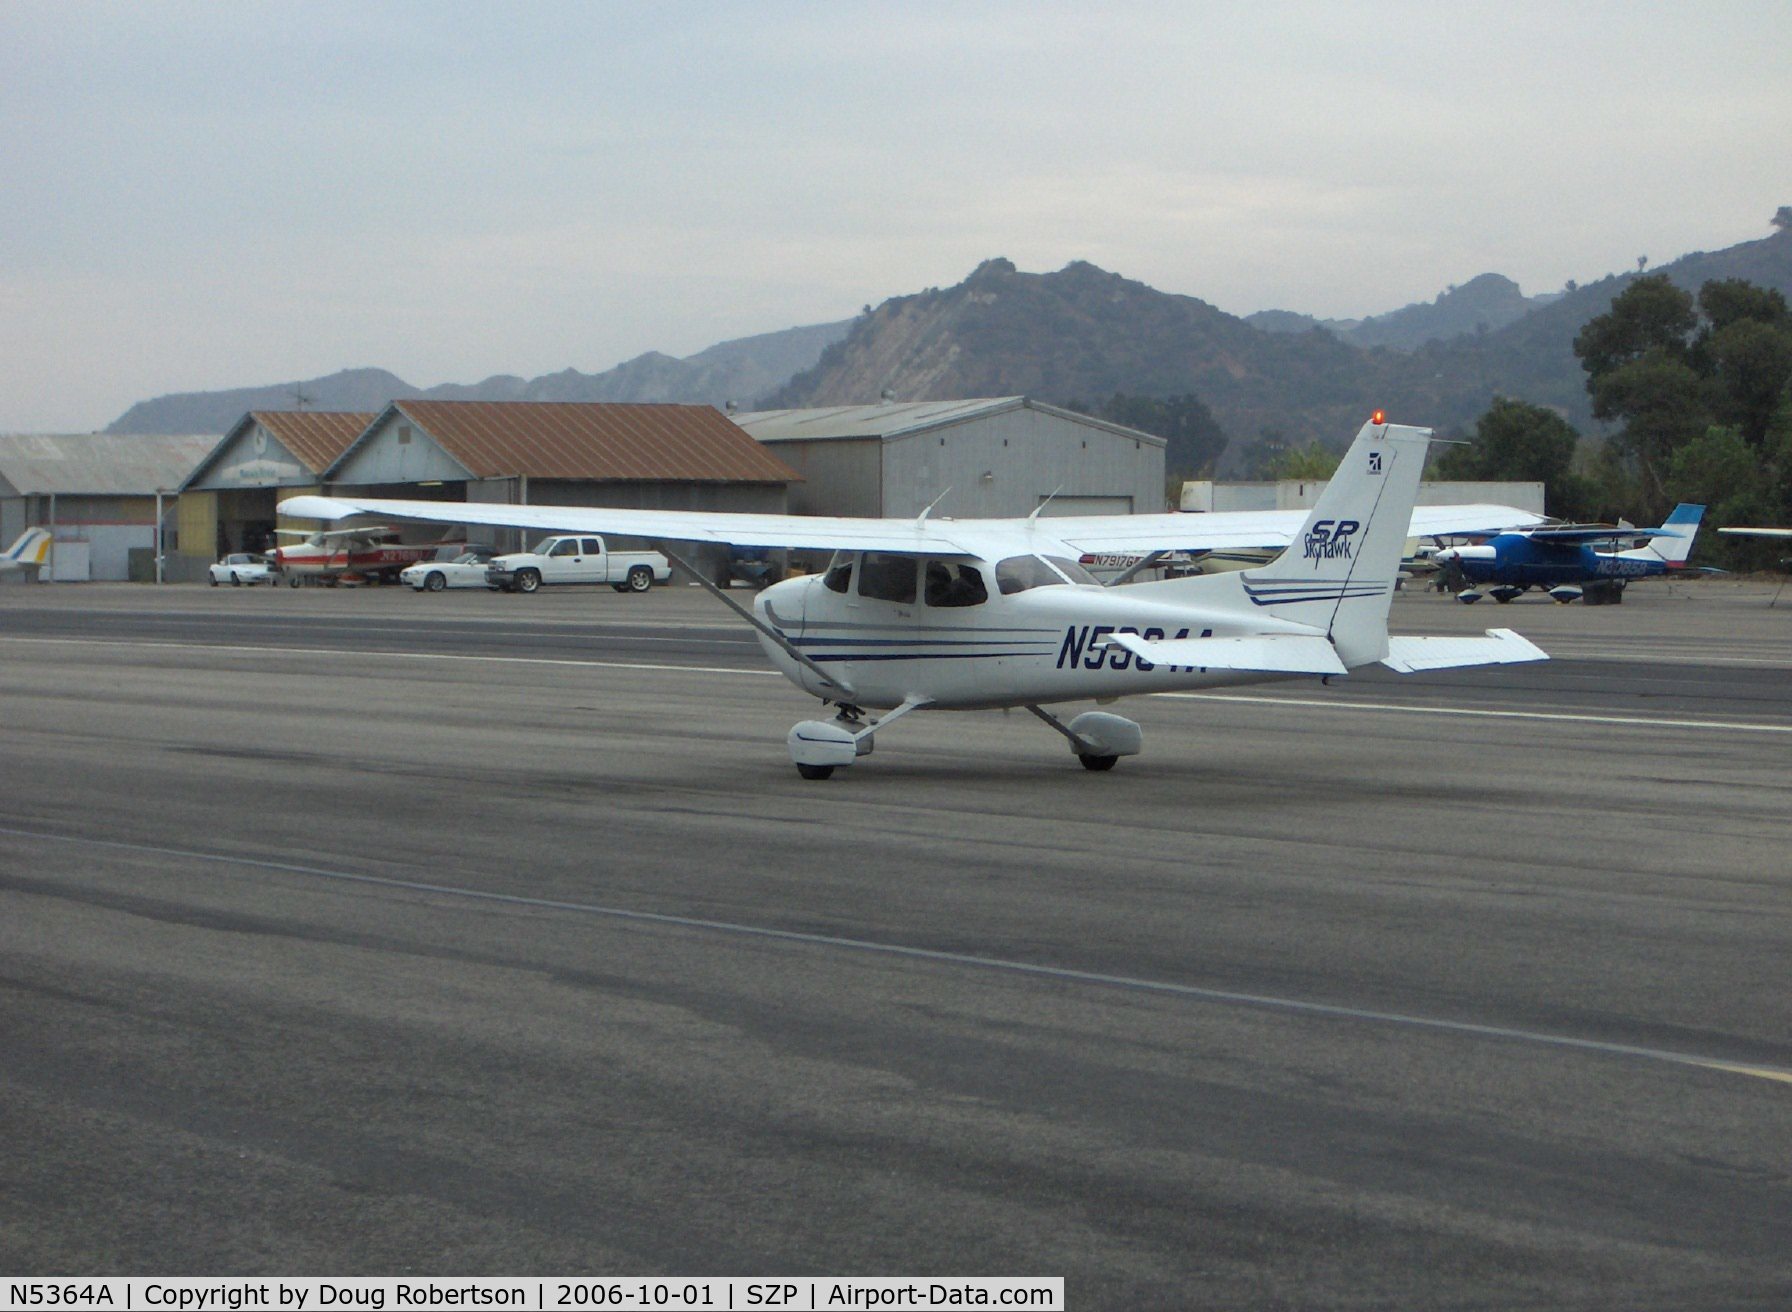 N5364A, 2003 Cessna 172S C/N 172S9417, 2003 Cessna 172S SKYHAWK SP, Lycoming IO-360-L2A 180 Hp, taxi to Runway 22